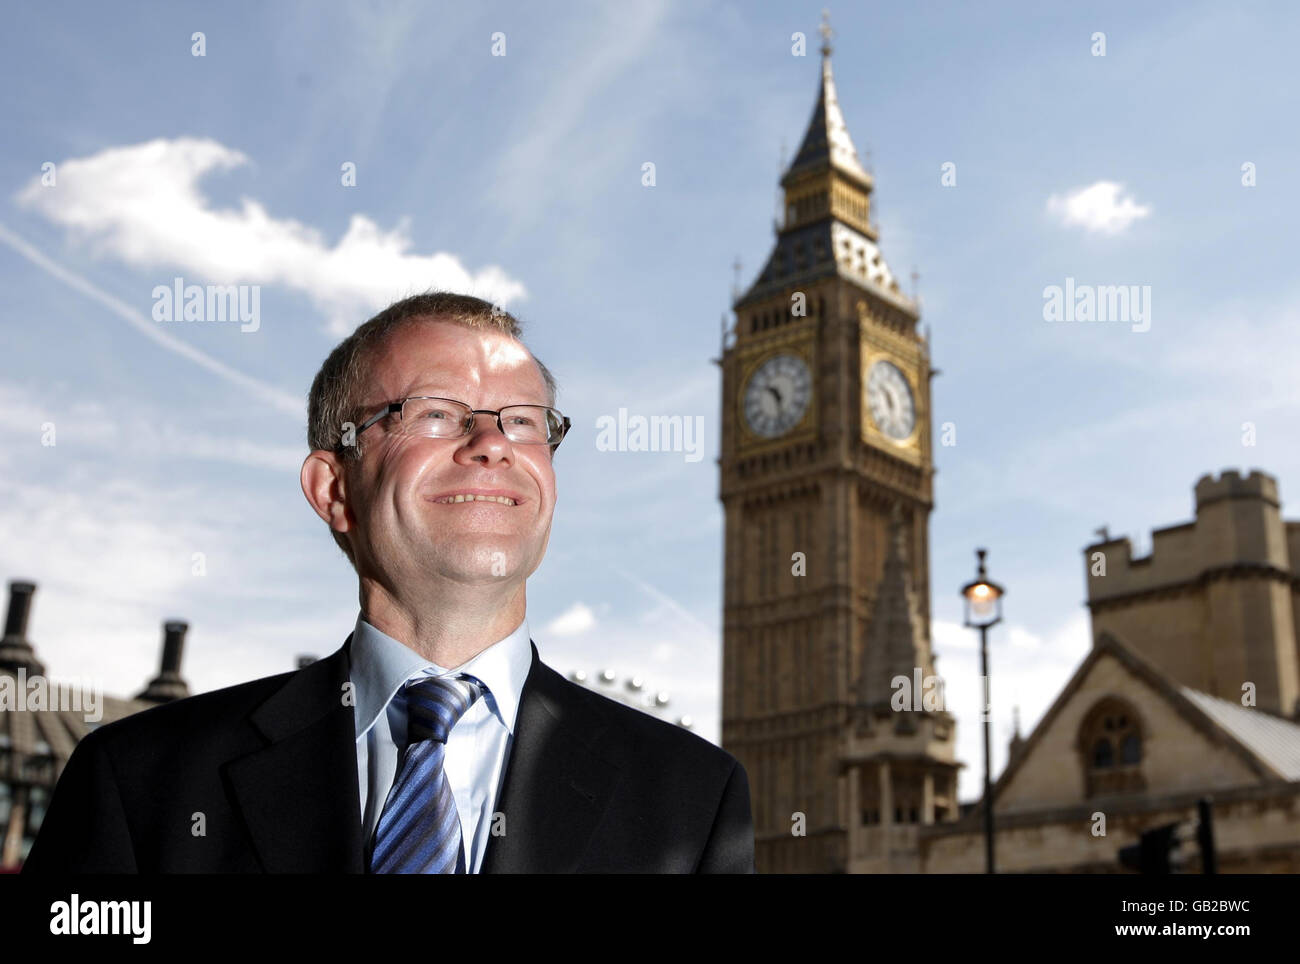 John Mason, the new Scottish National Party MP for Glasgow East, stands outside the Houses of Parliament, Westminster, London. Stock Photo